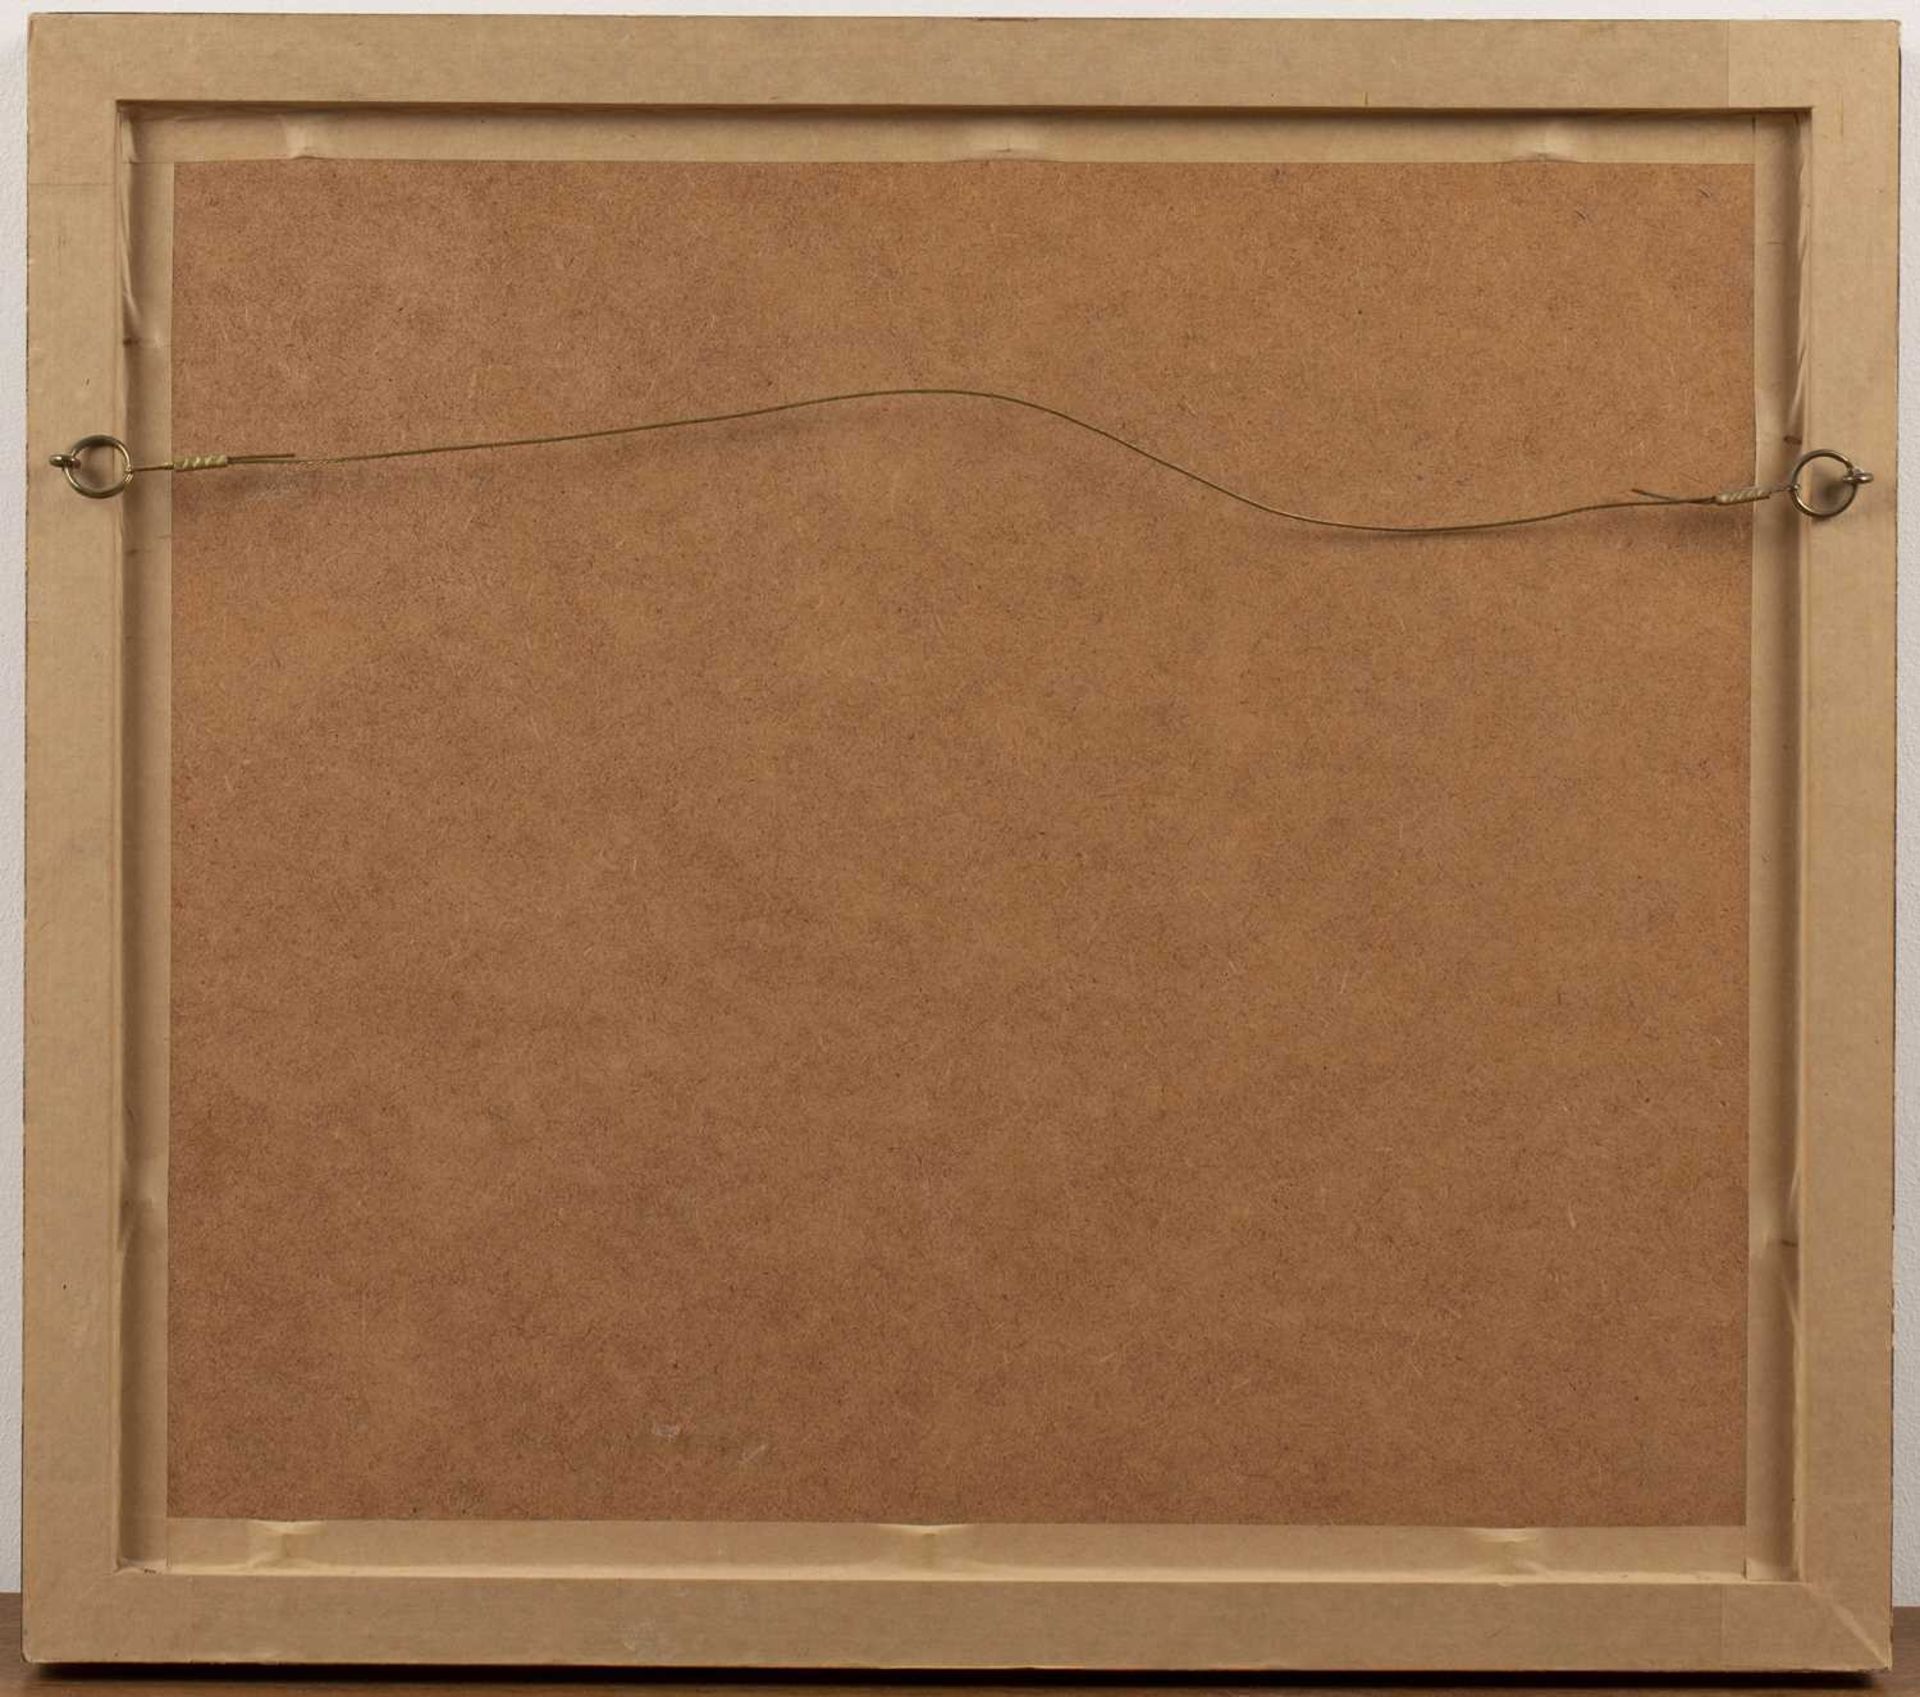 Erich Keber (20th Century Continental School) 'Untitled sketch of a tree', signed and dated '84' - Image 6 of 6